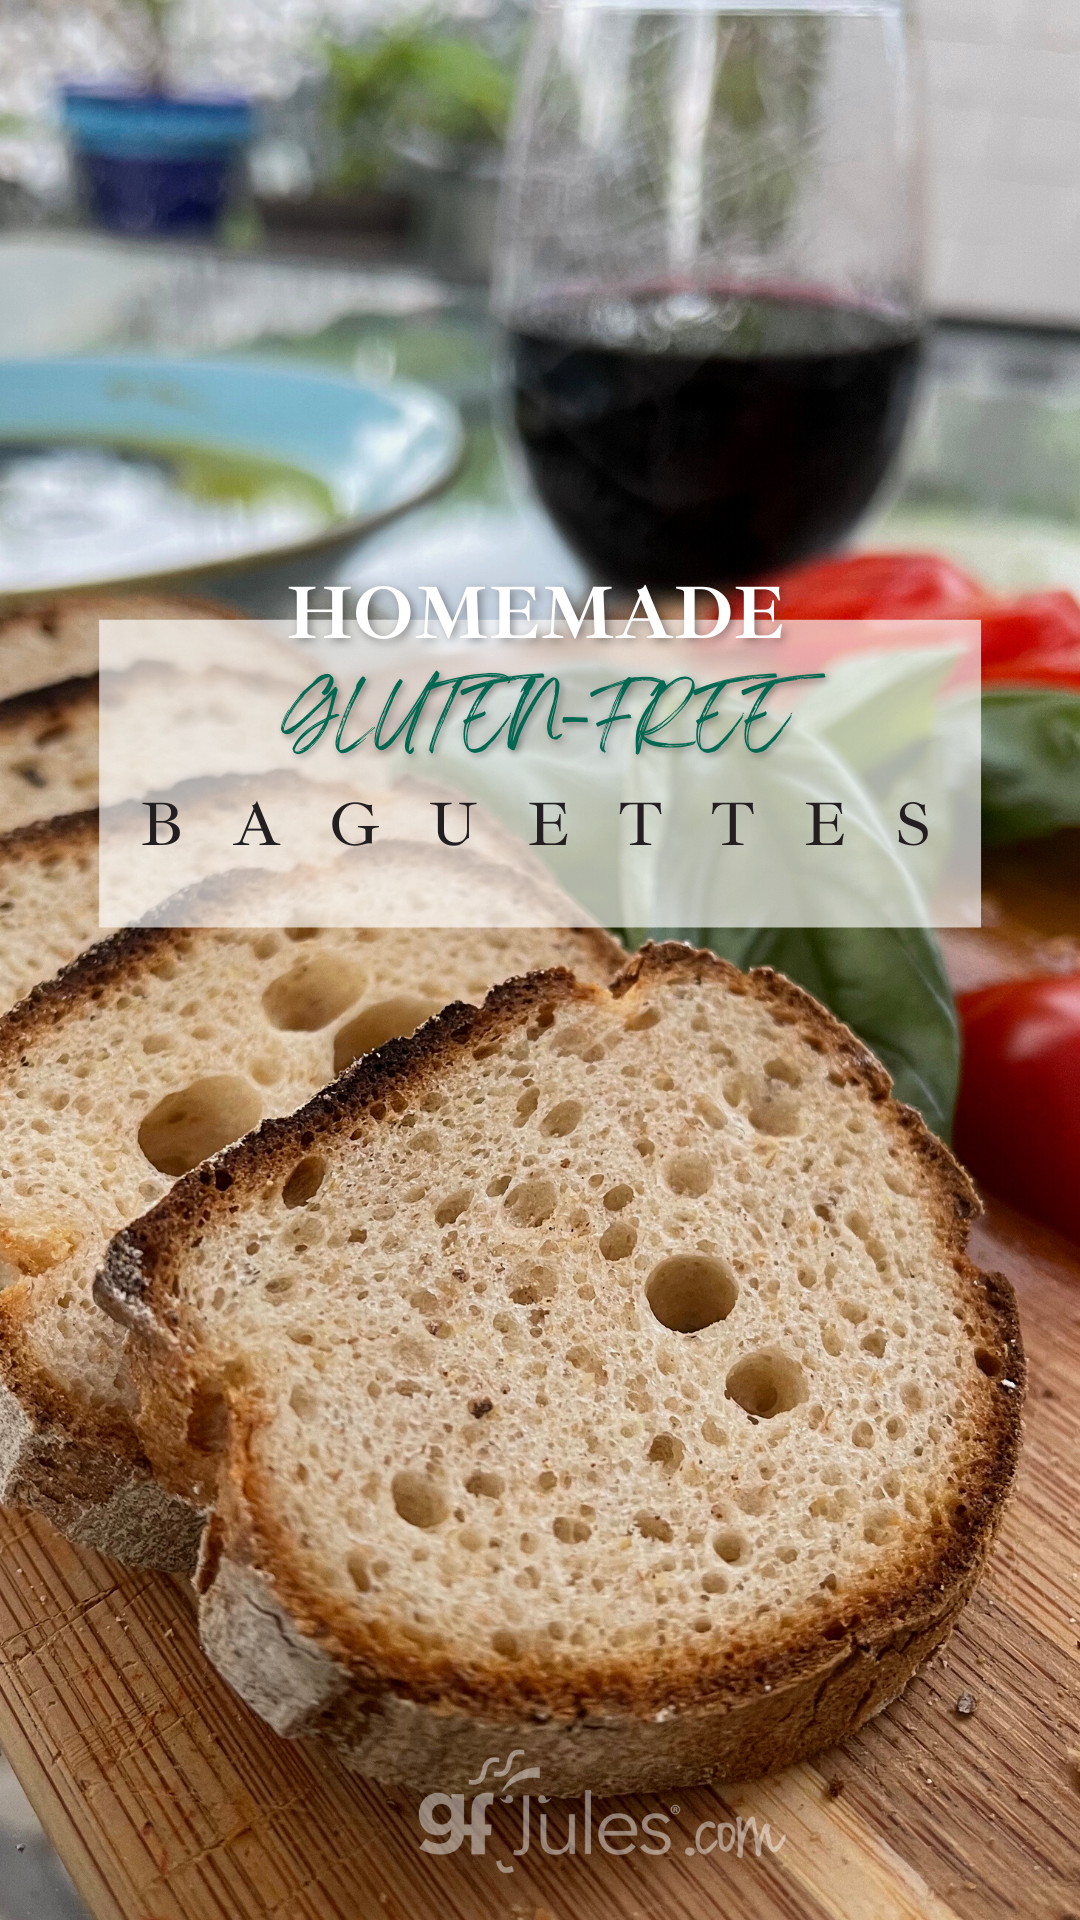 Gluten Free Baguette with basil and tomatoes | gfJules